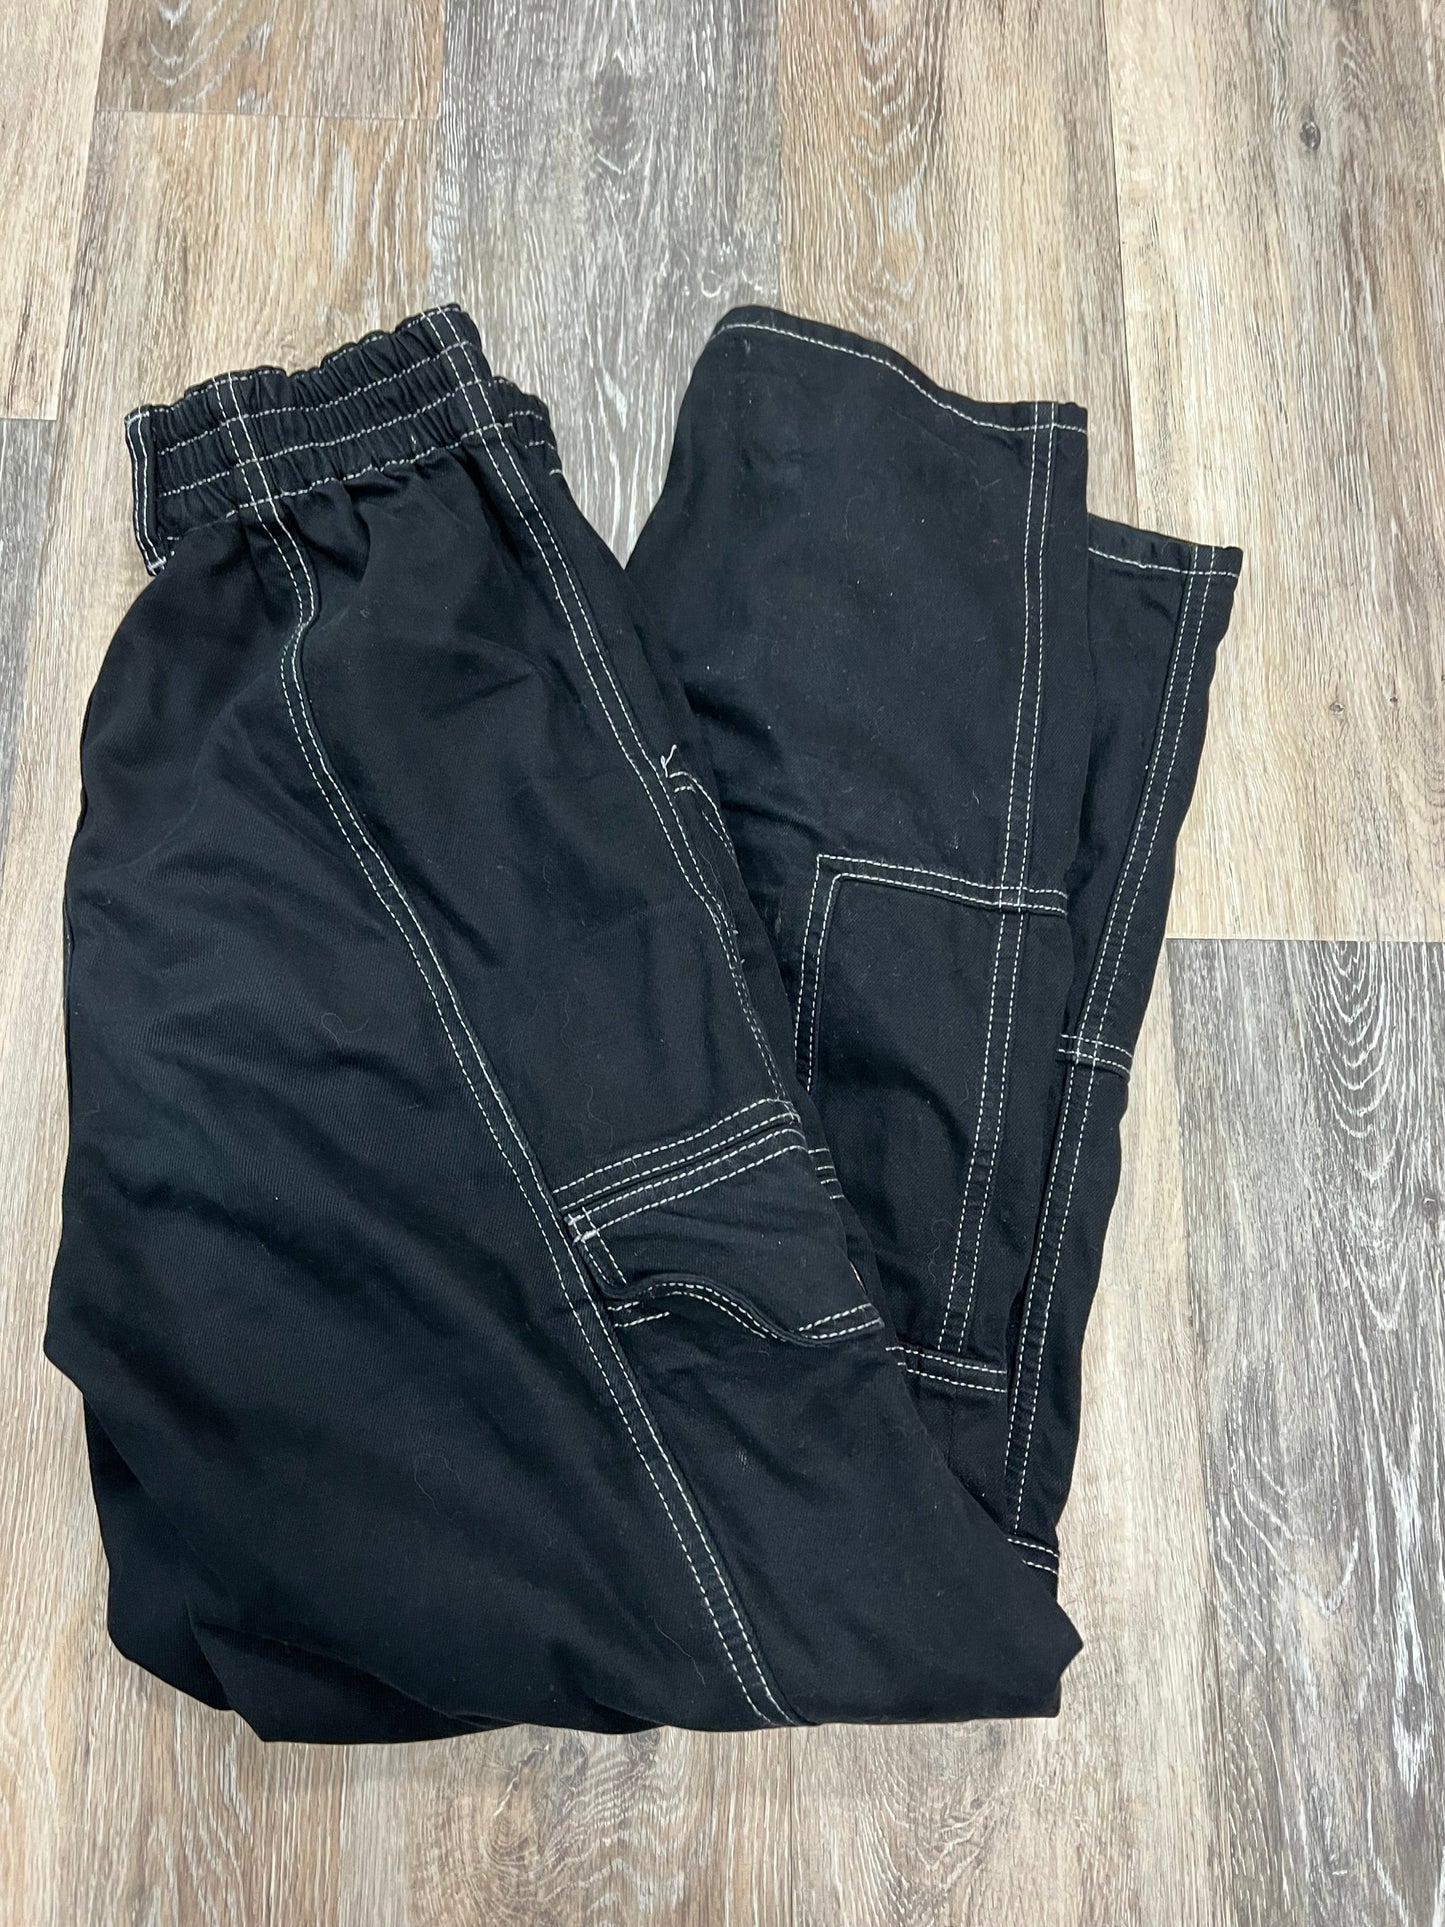 Pants Cargo & Utility By Bdg  Size: 1/25